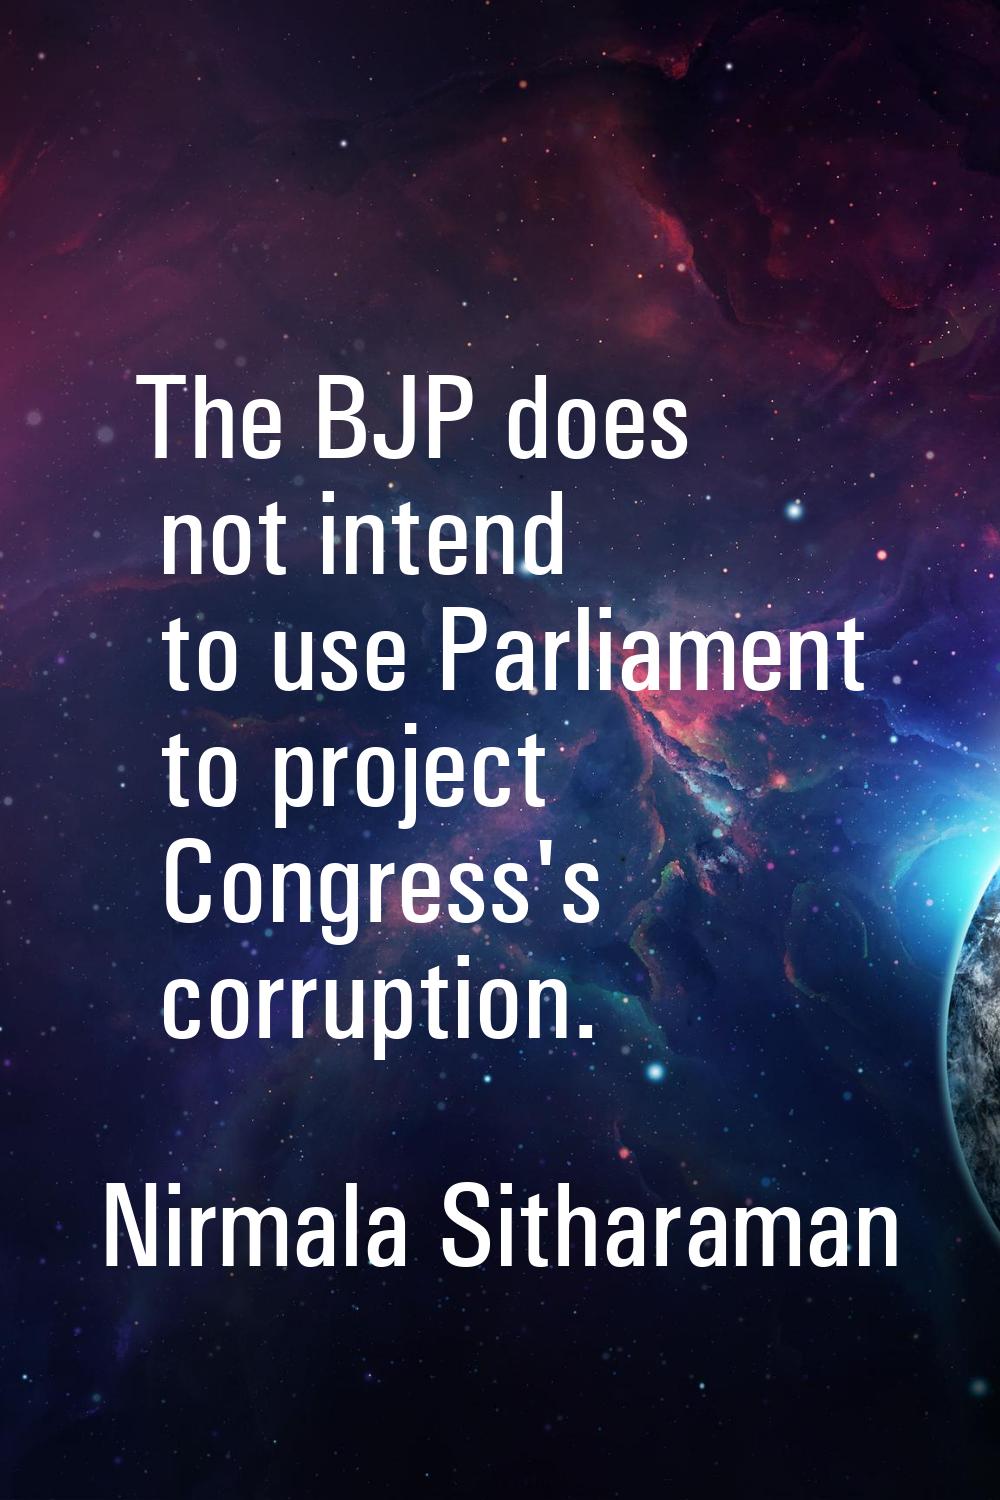 The BJP does not intend to use Parliament to project Congress's corruption.